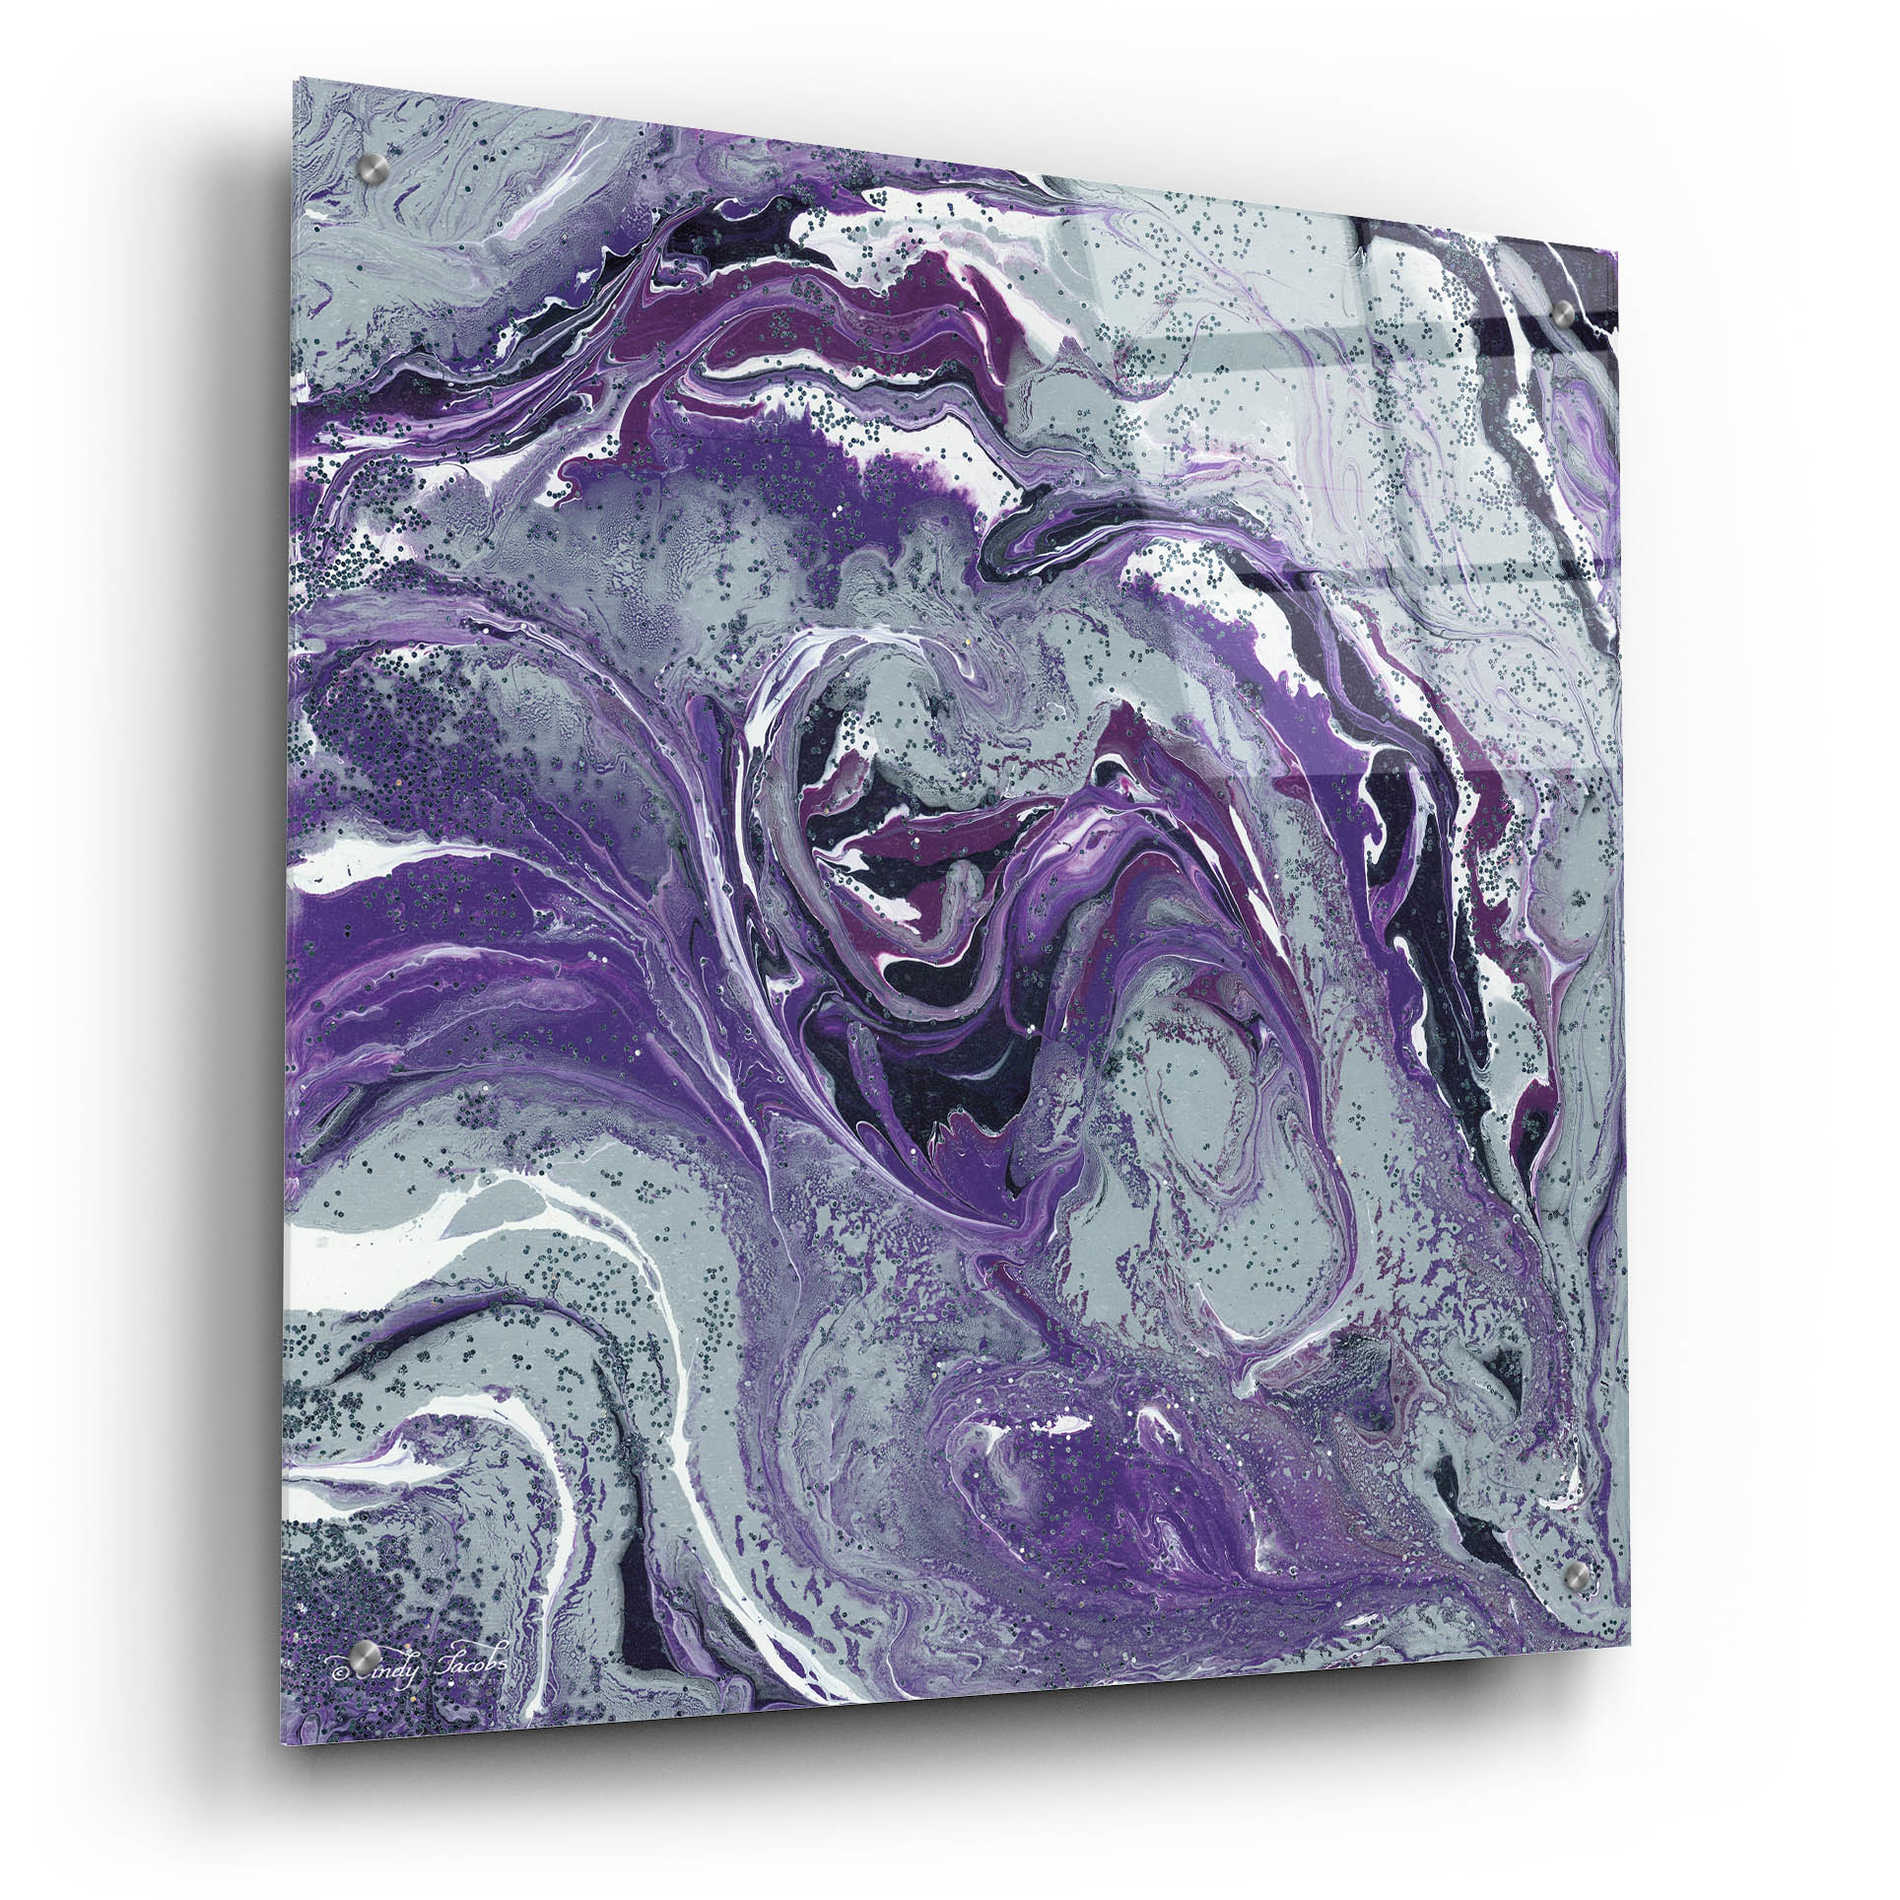 Epic Art 'Abstract in Purple I' by Cindy Jacobs, Acrylic Glass Wall Art,24x24